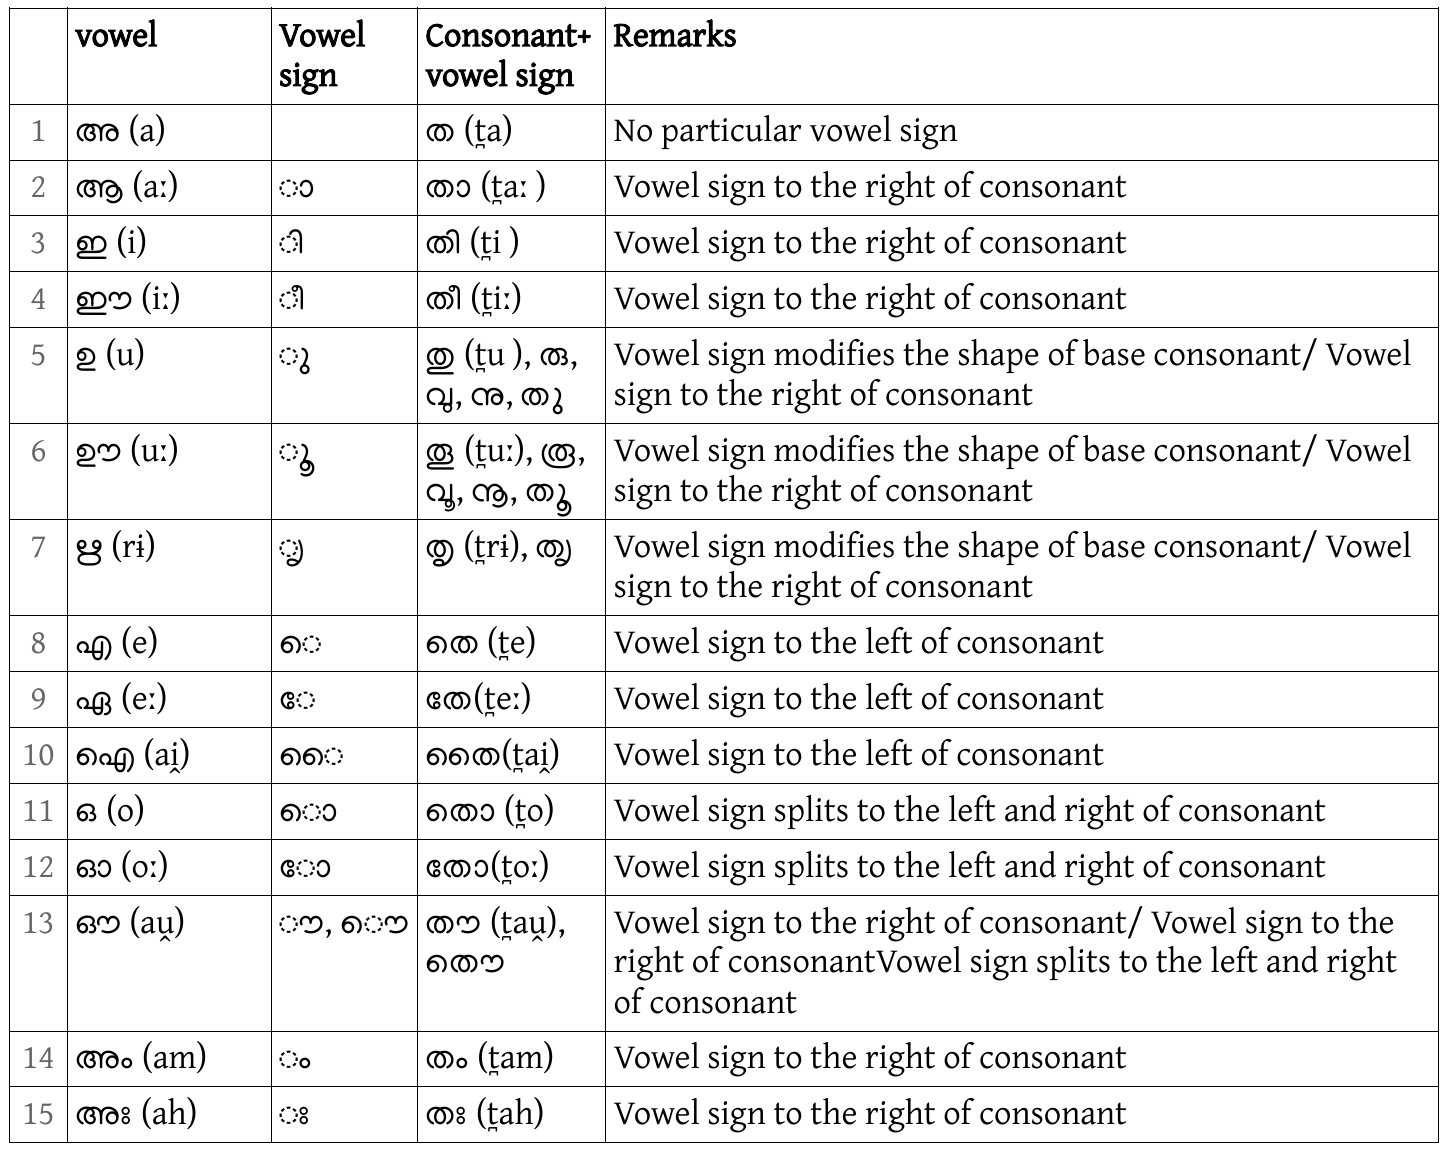 A tabular image showing the list of all independent vowels, dependent vowel signs and how the vowle sign modifies a consonant letter in Malayalam